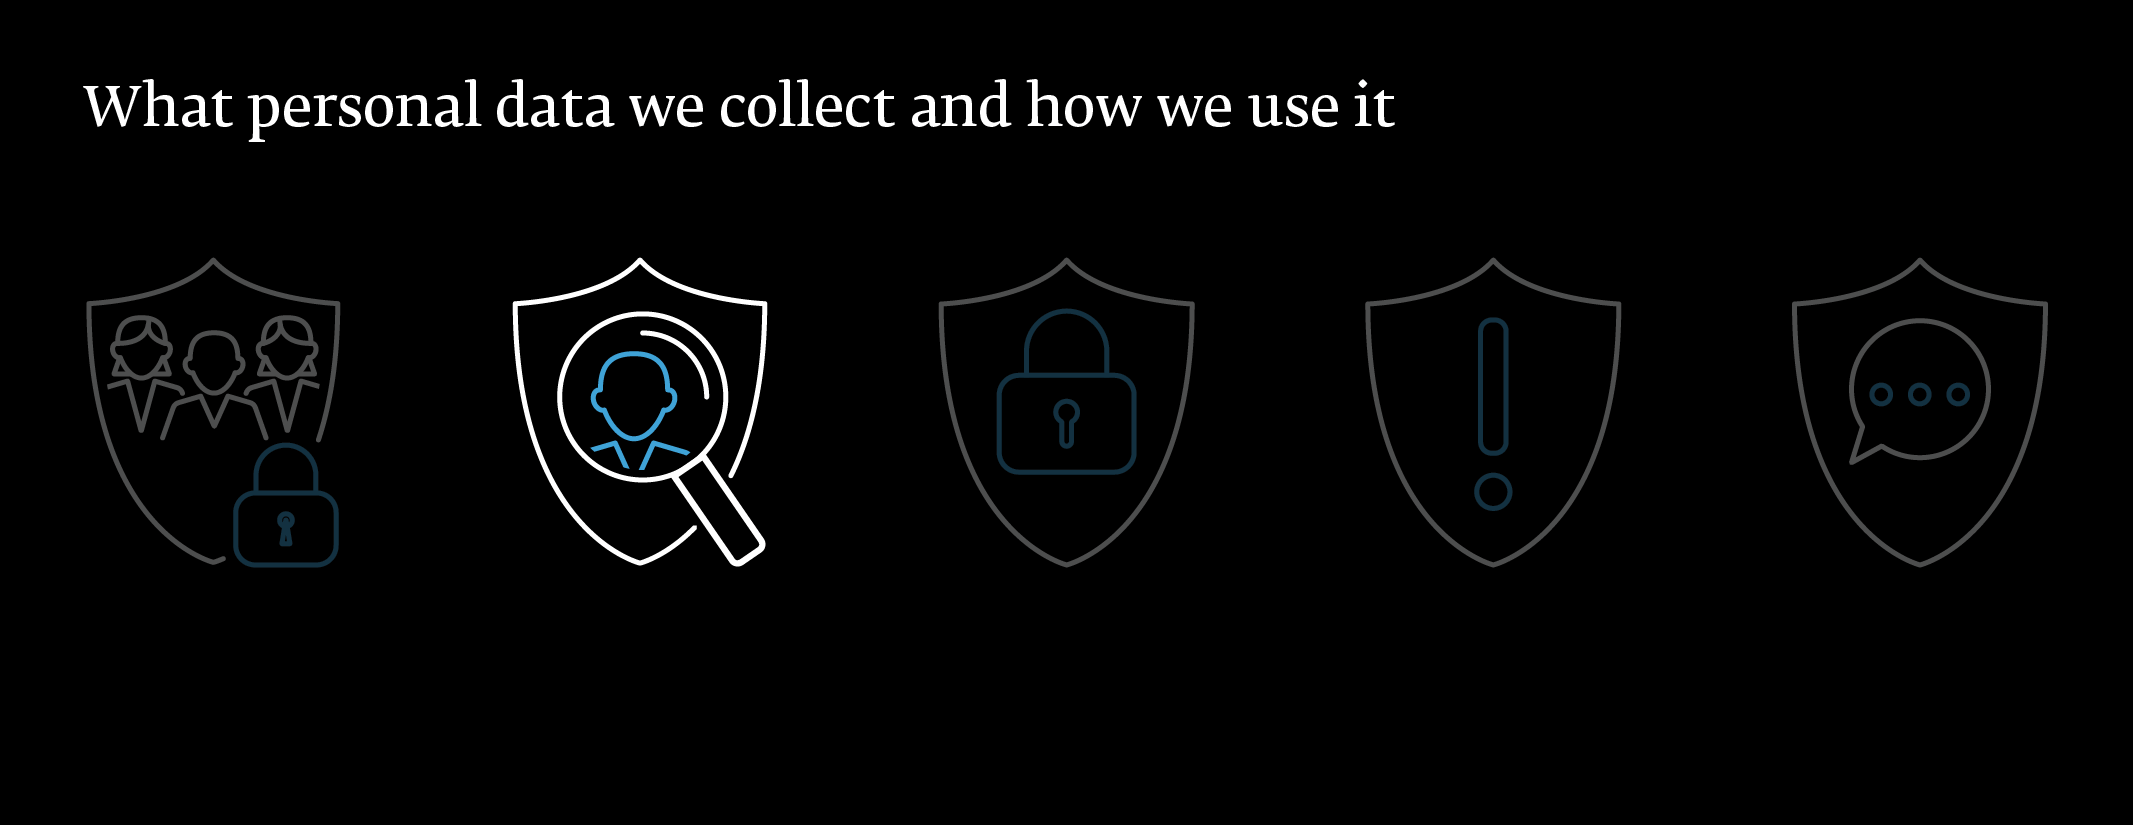 What personal data we collect and how we use it